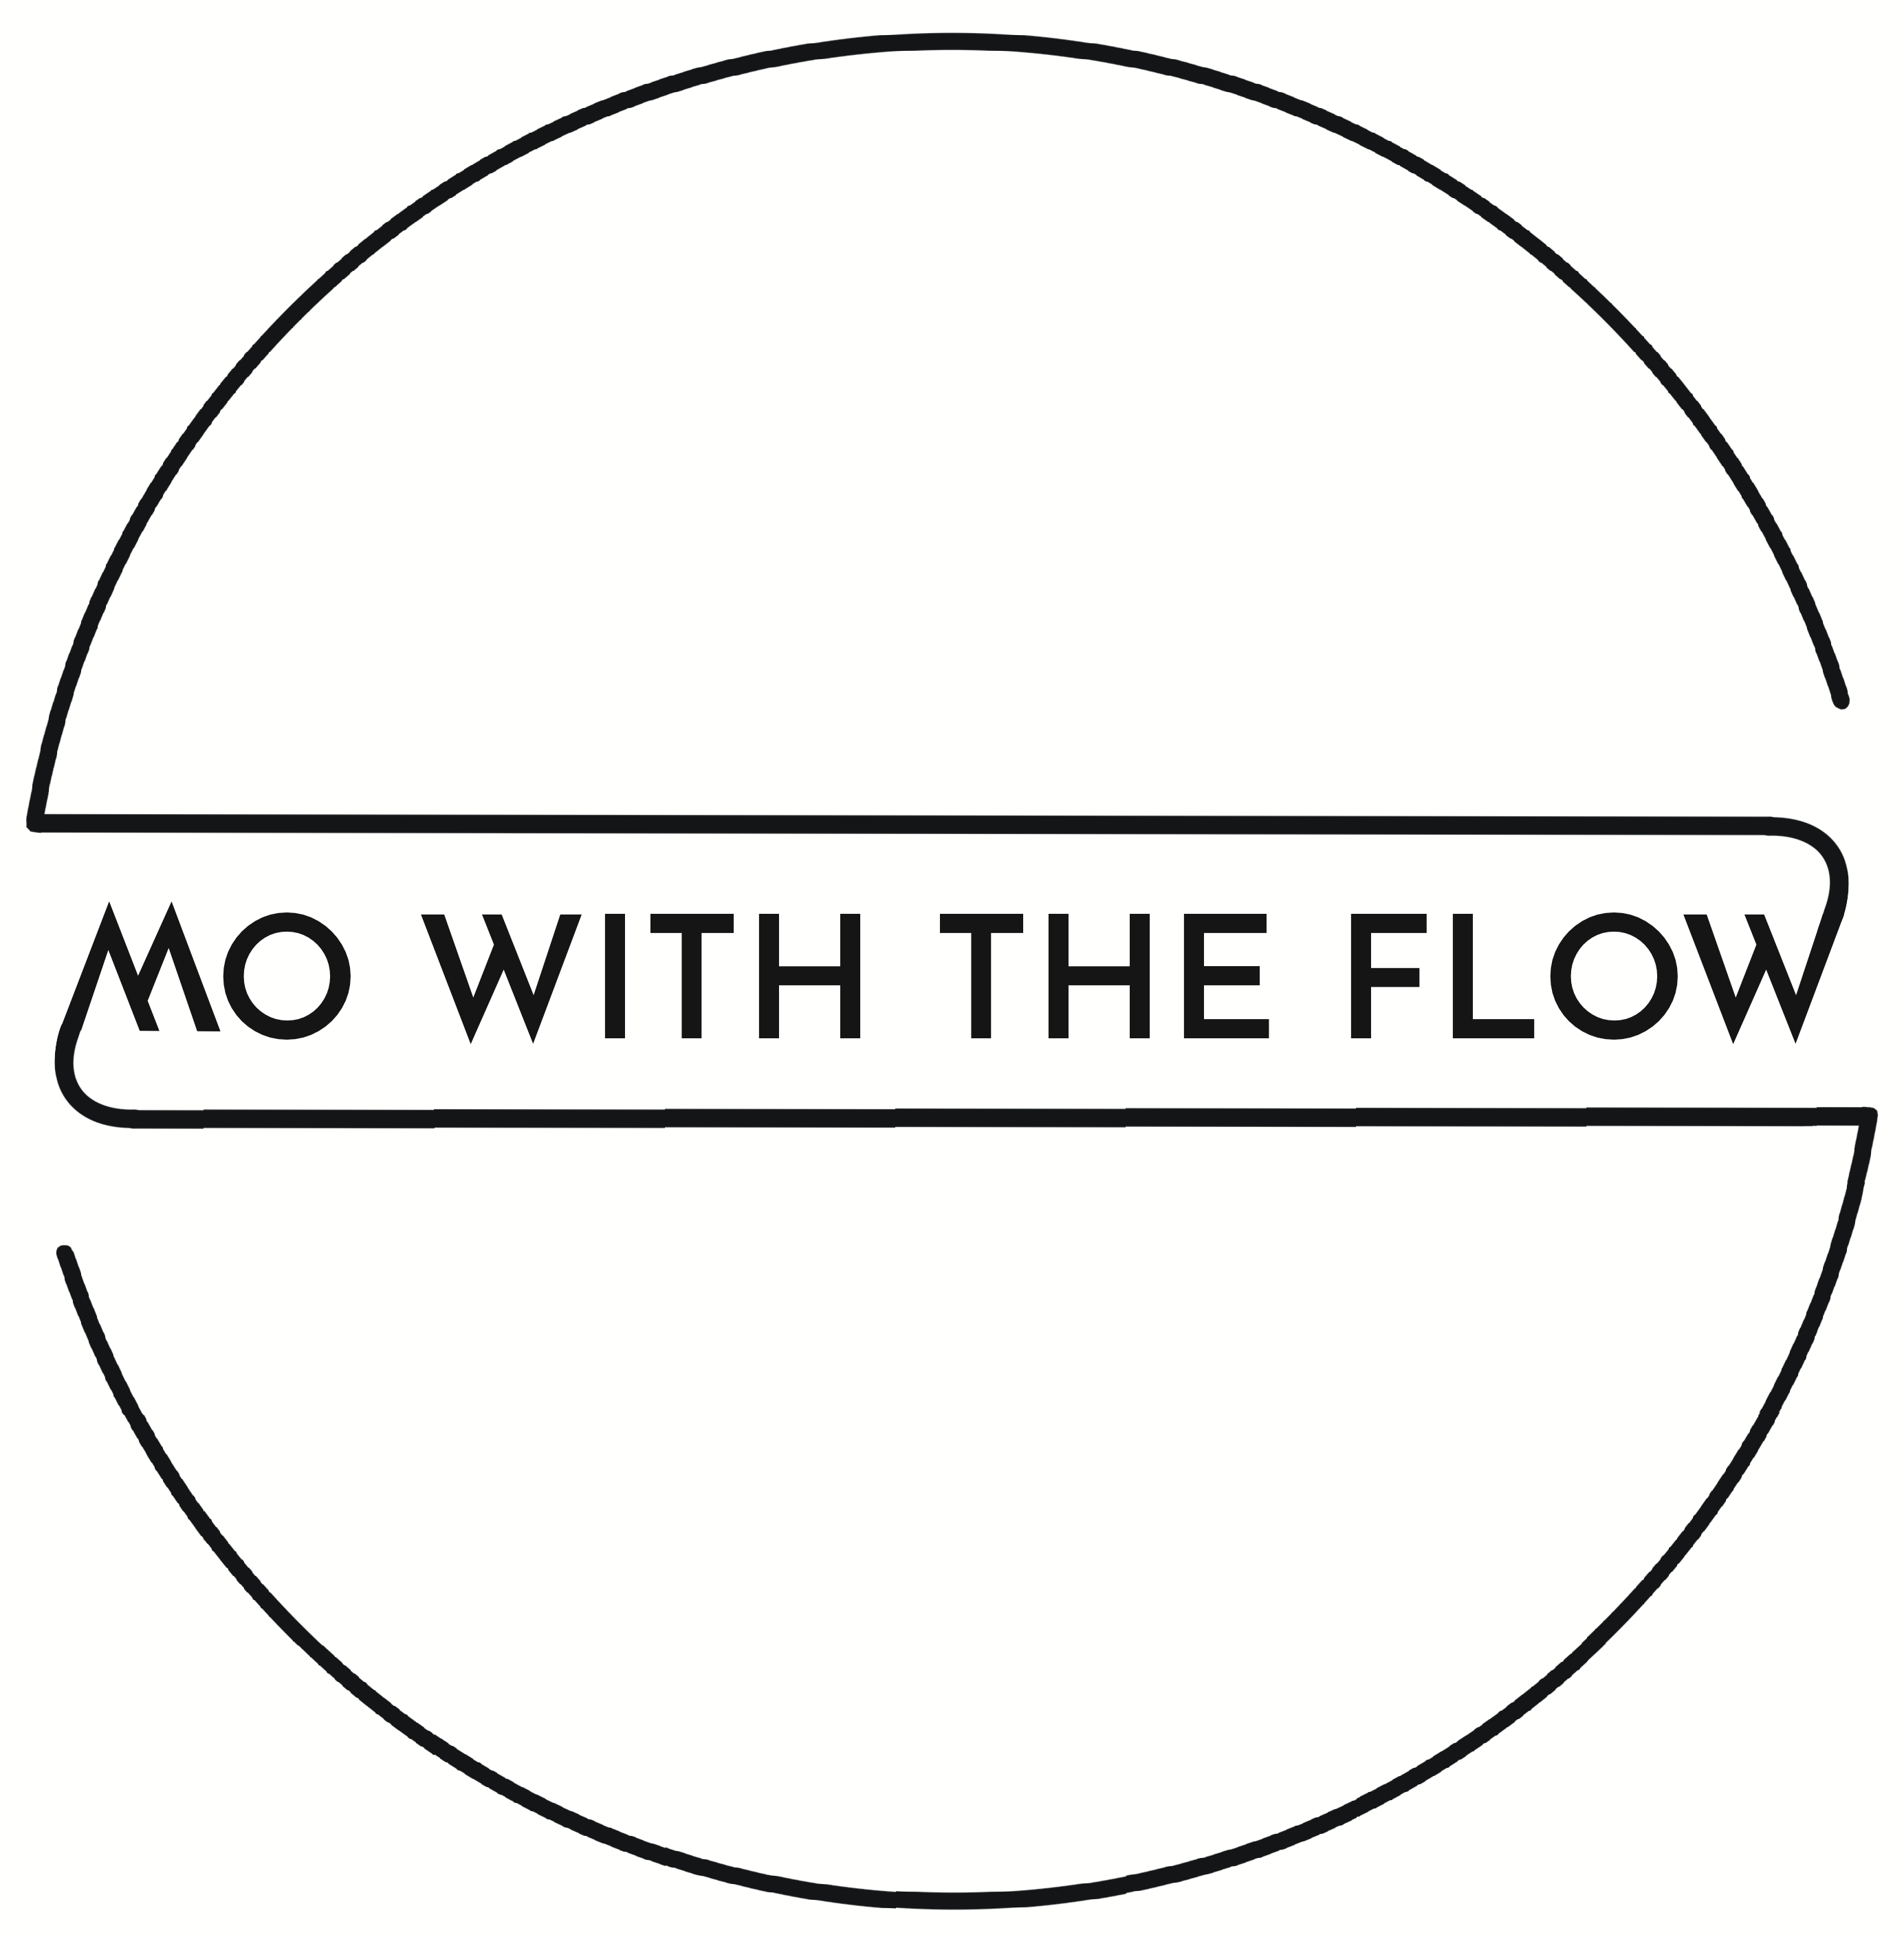 MOwiththeflow